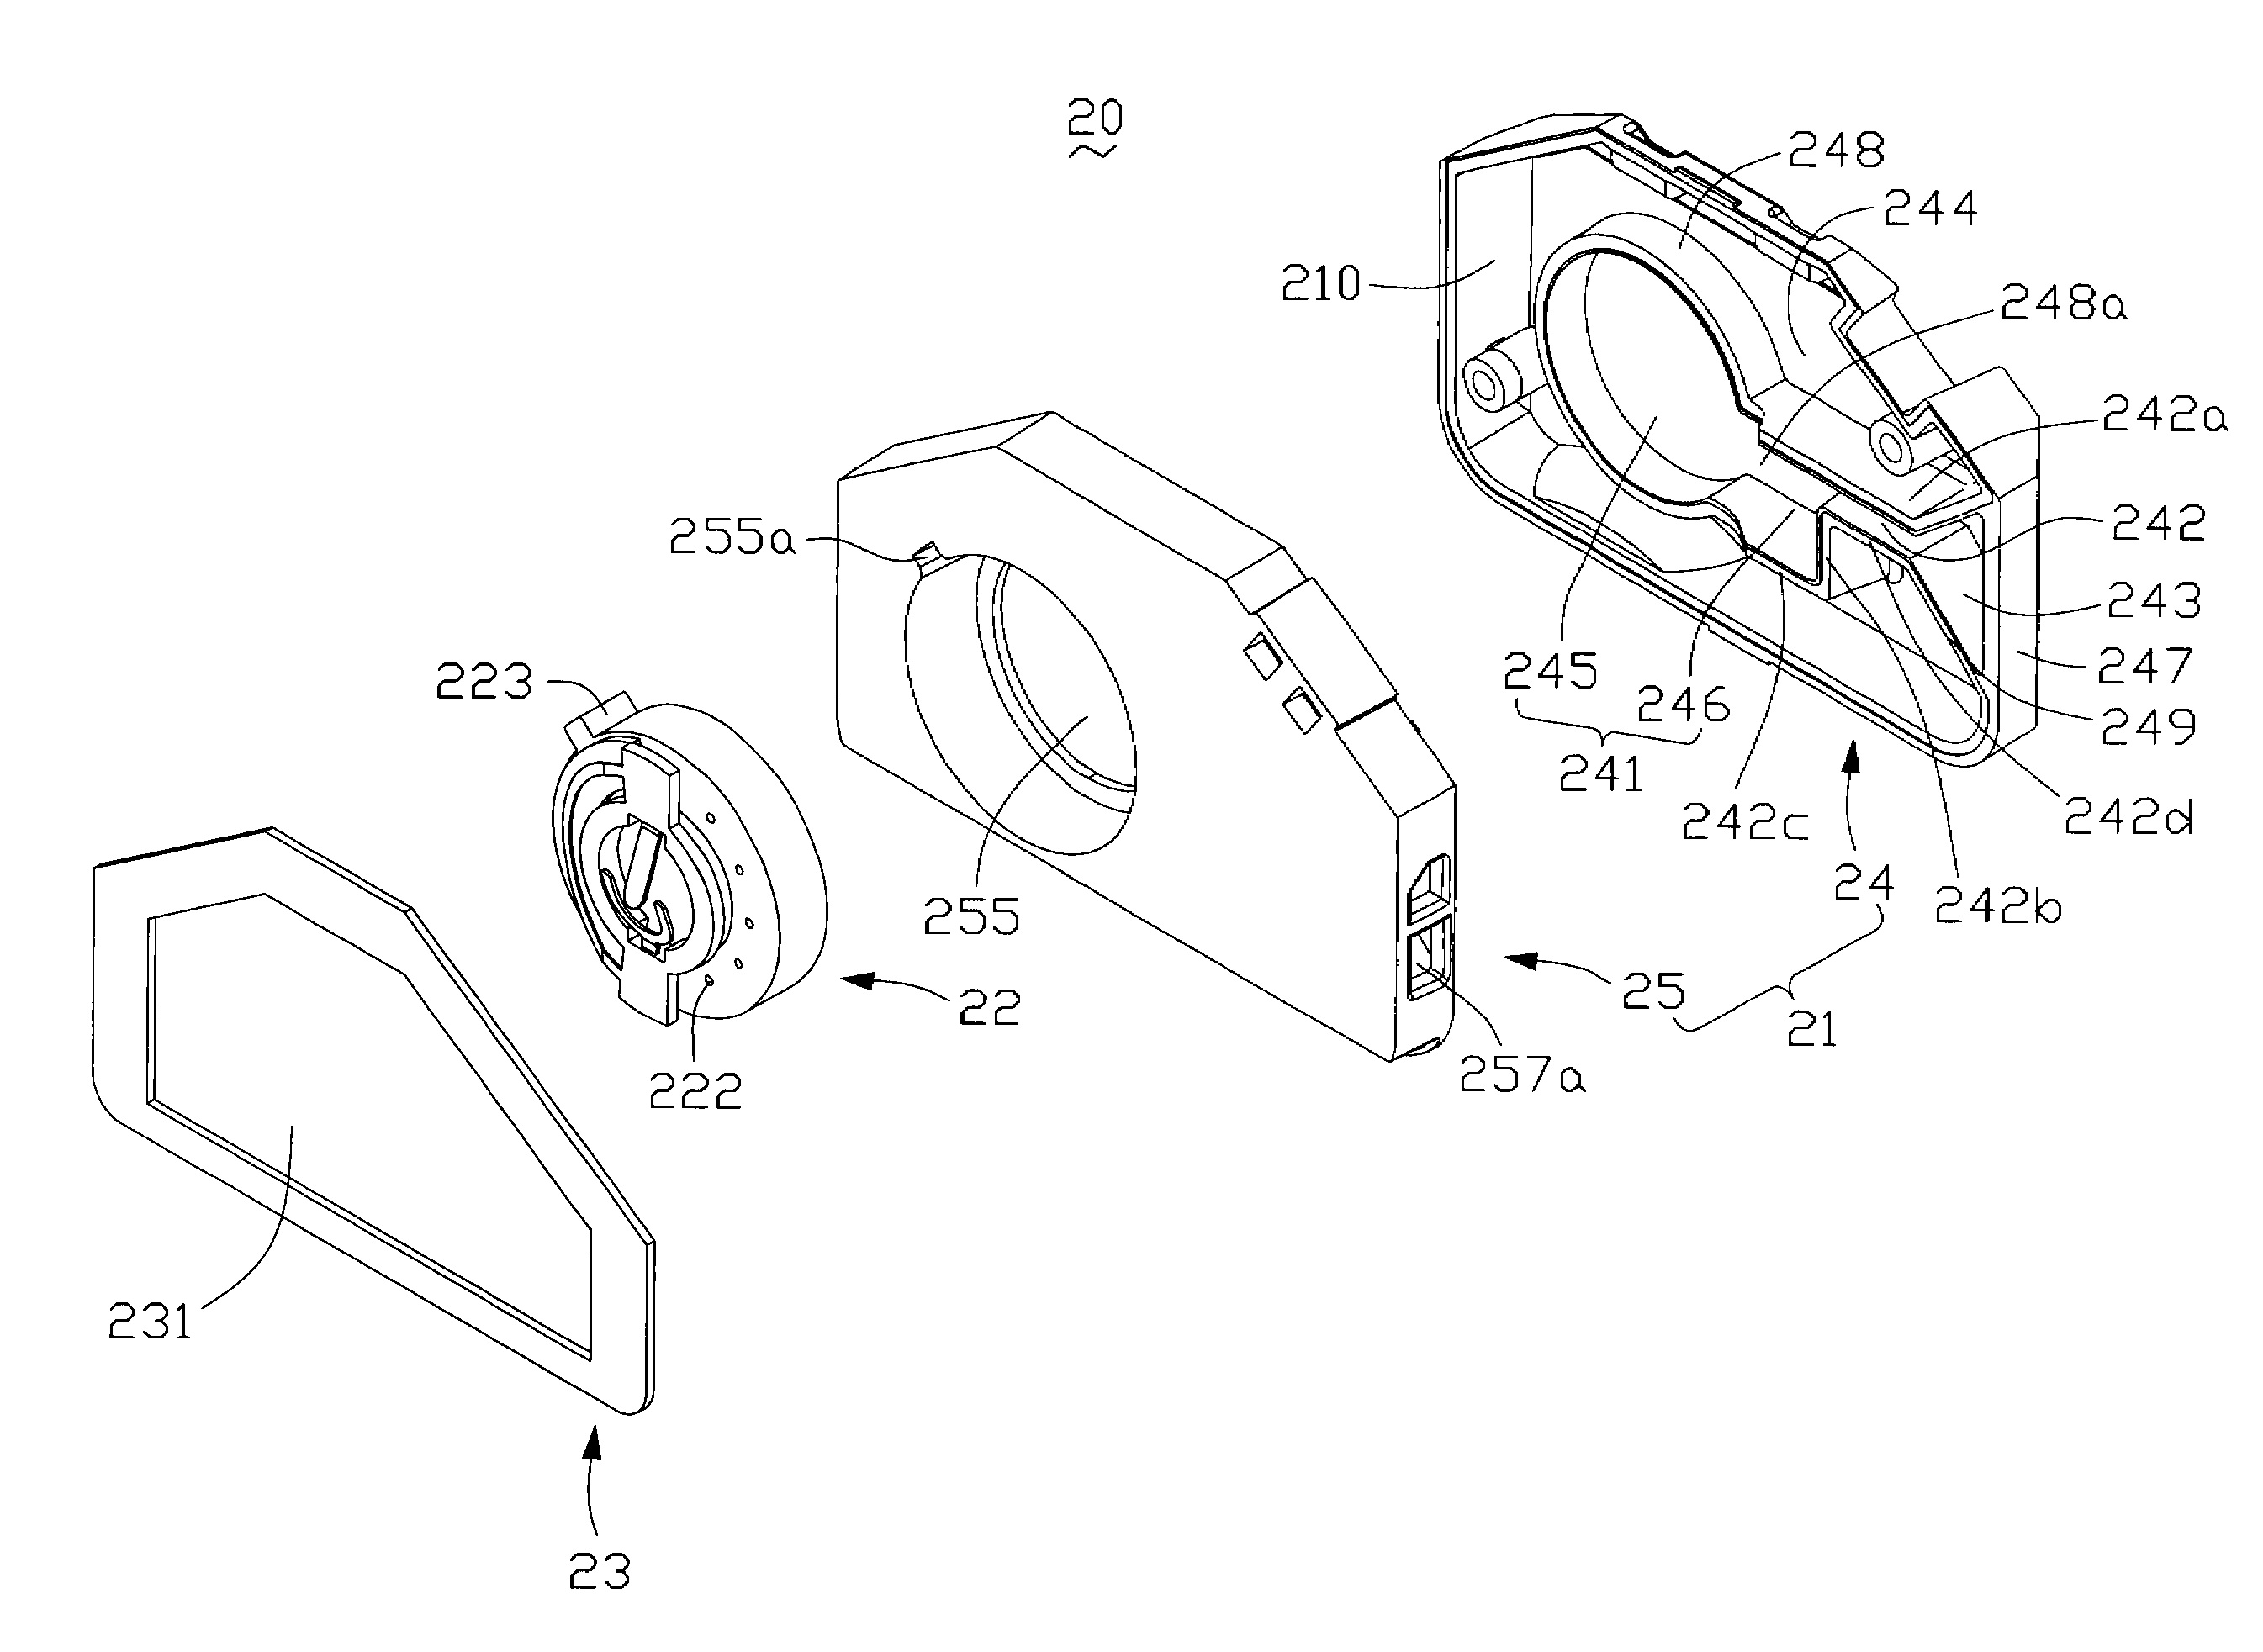 Speaker set and mobile phone incorporating the same